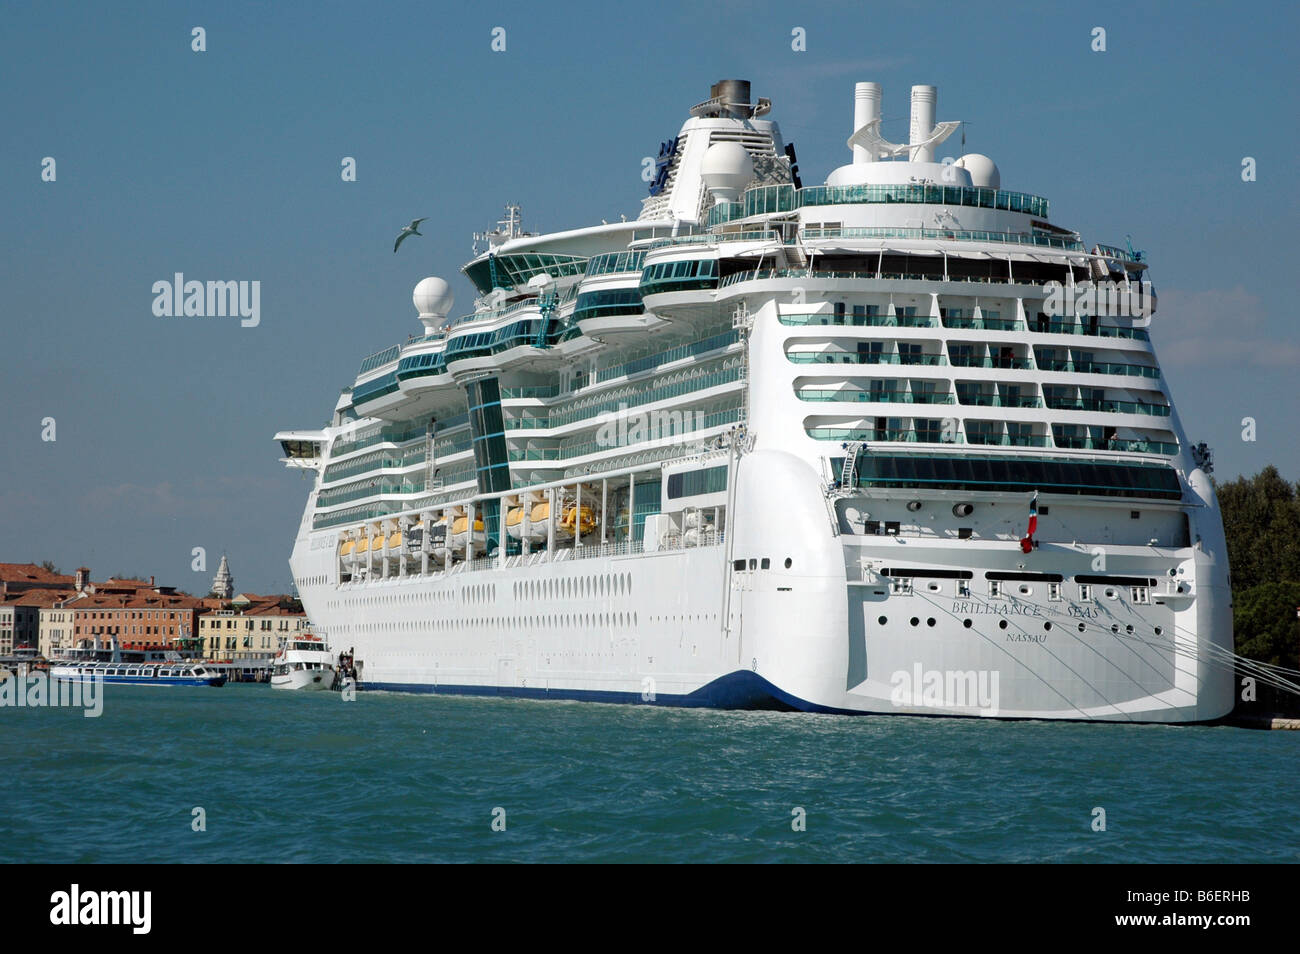 Cruise liner, Brilliance of the Seas, built in 2002, can carry 2500 passengers, during a visit in Venice, Veneto, Italy, Europe Stock Photo